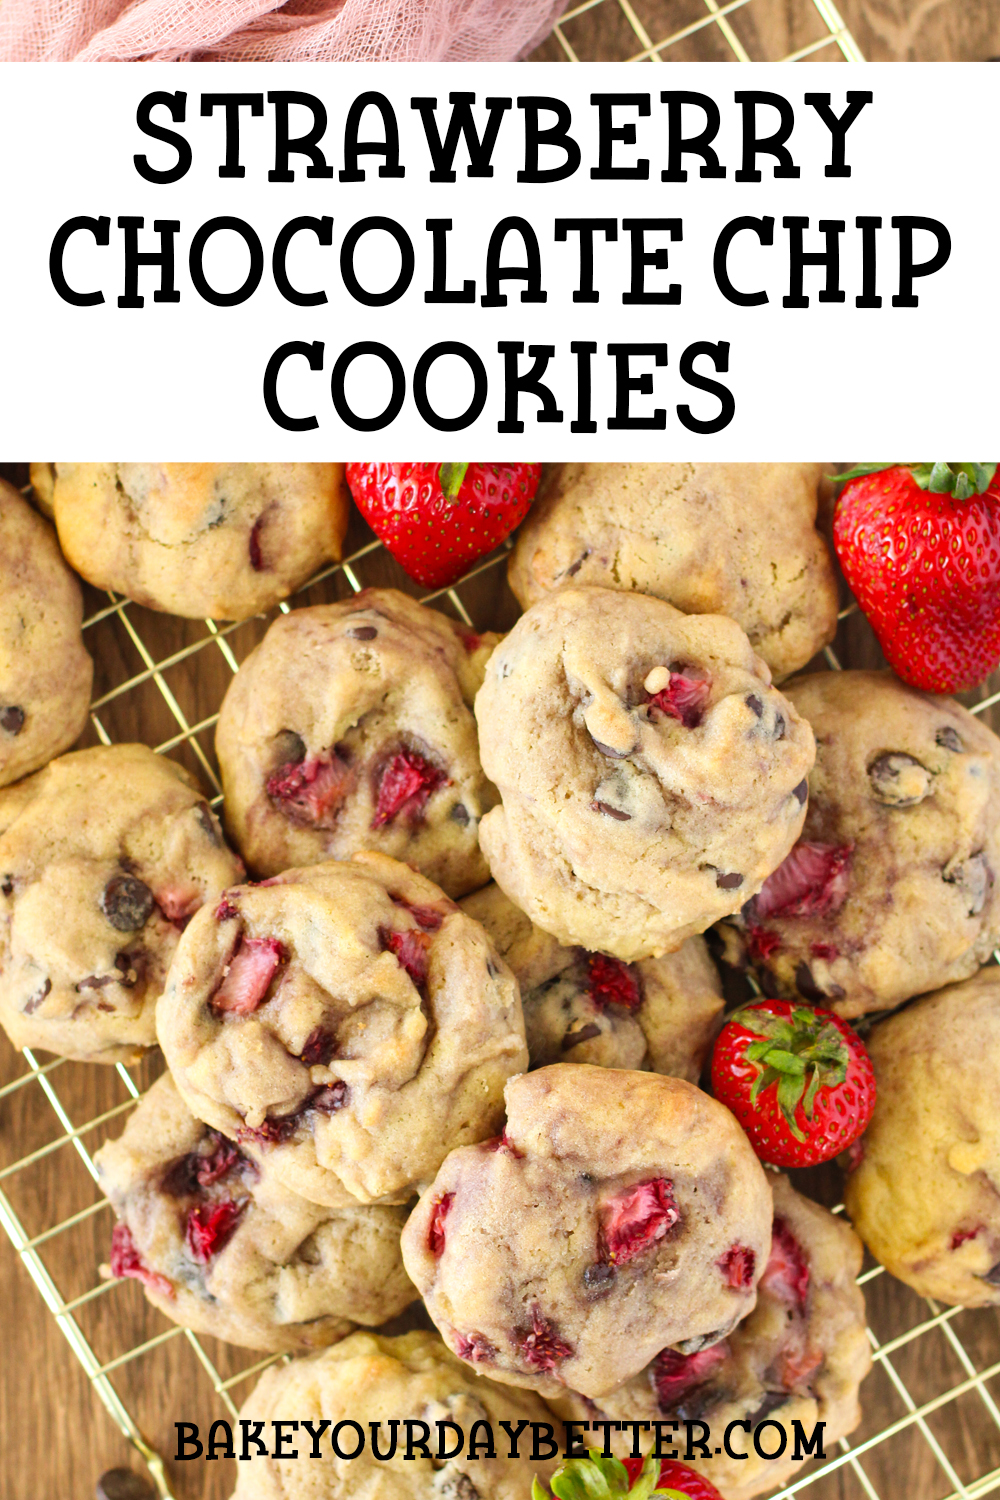 picture of cookies with text overlay that says: strawberry chocolate chip cookies